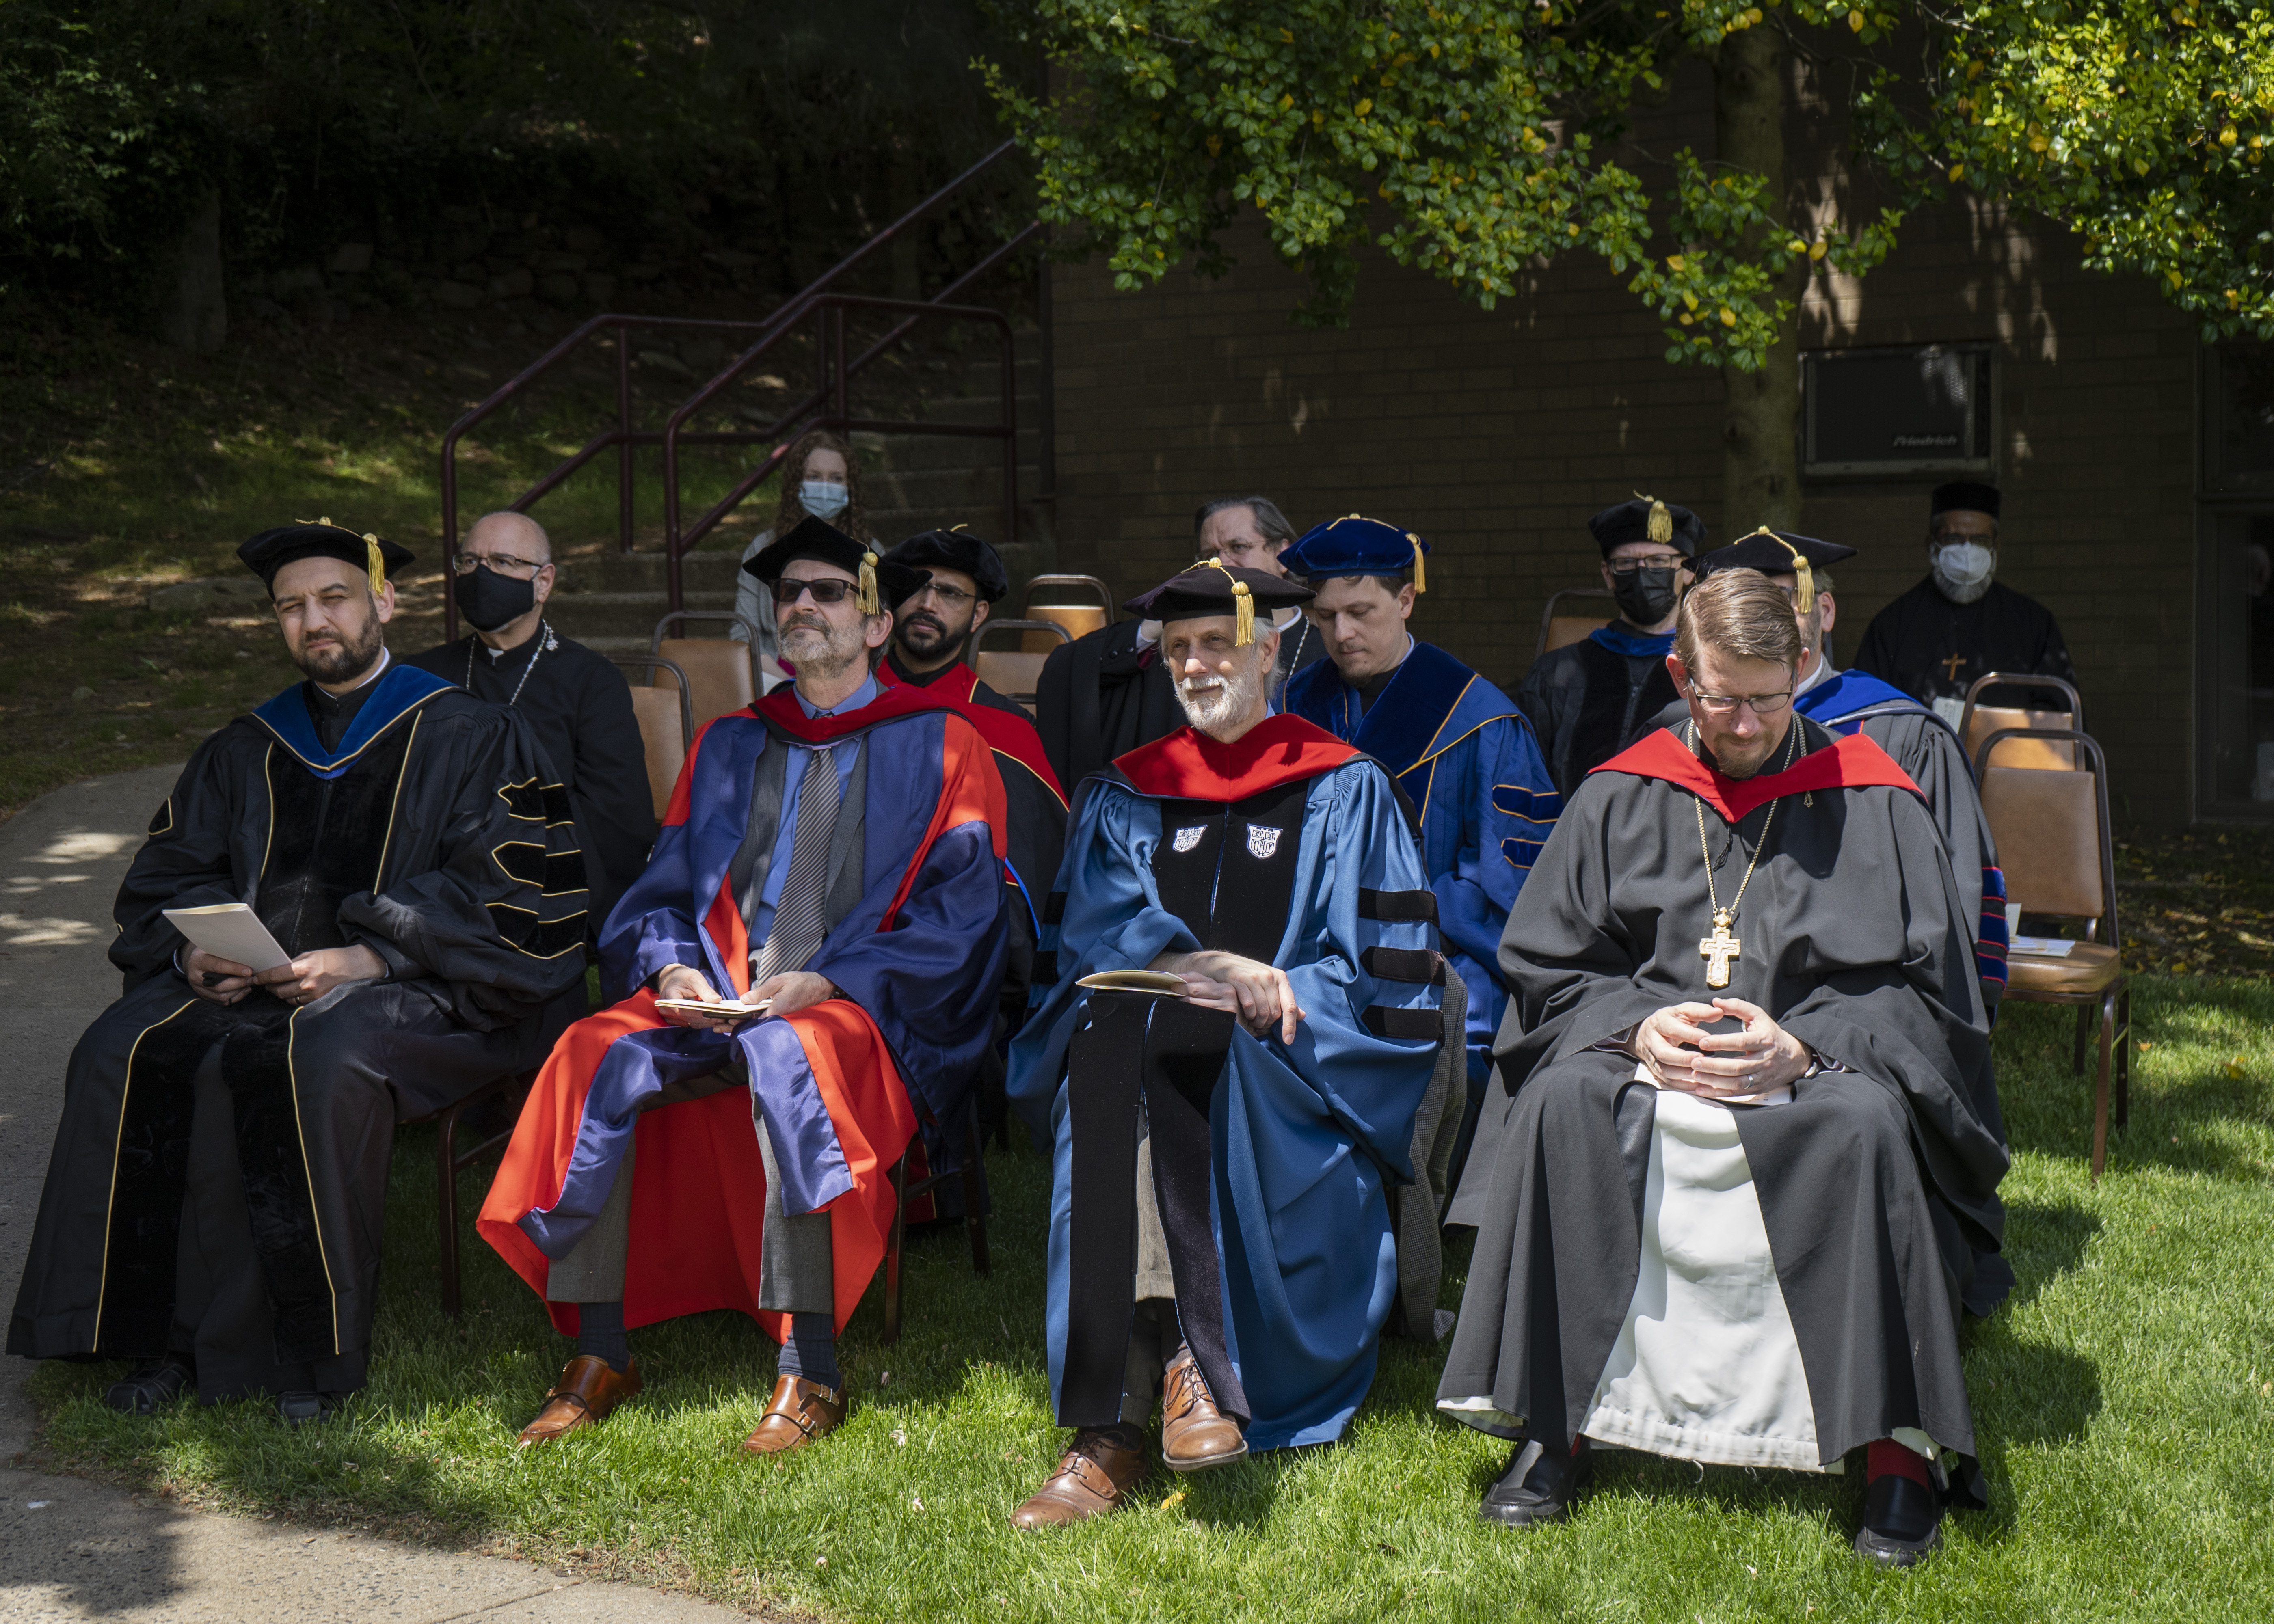 Scenes from Commencement